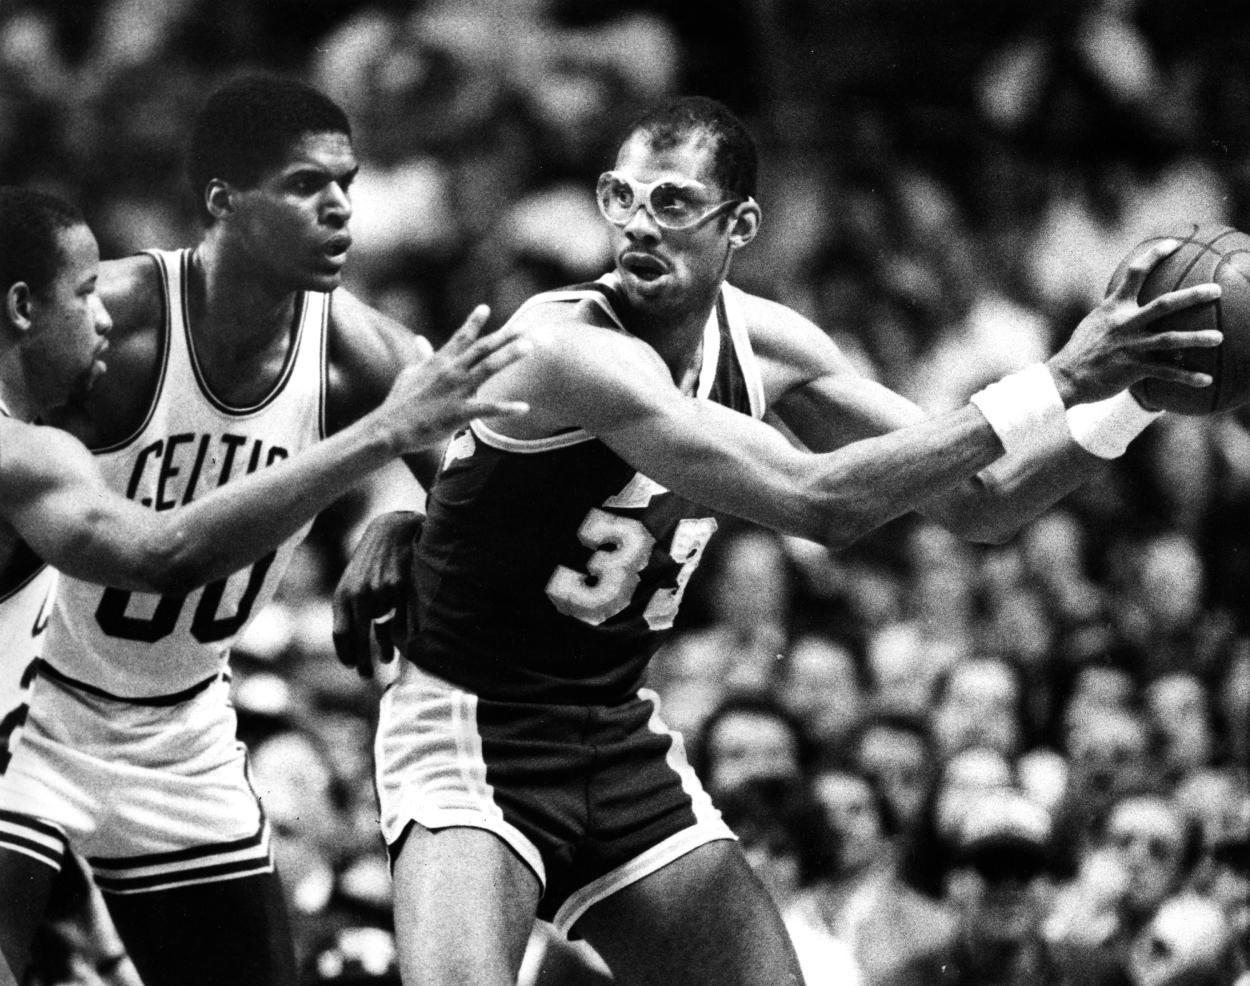 Los Angeles Lakers' Kareem Abdul-Jabbar is guarded by the Celtics' Robert Parish and Ray Williams, far left, during Game 2 of the 1985 NBA Finals.